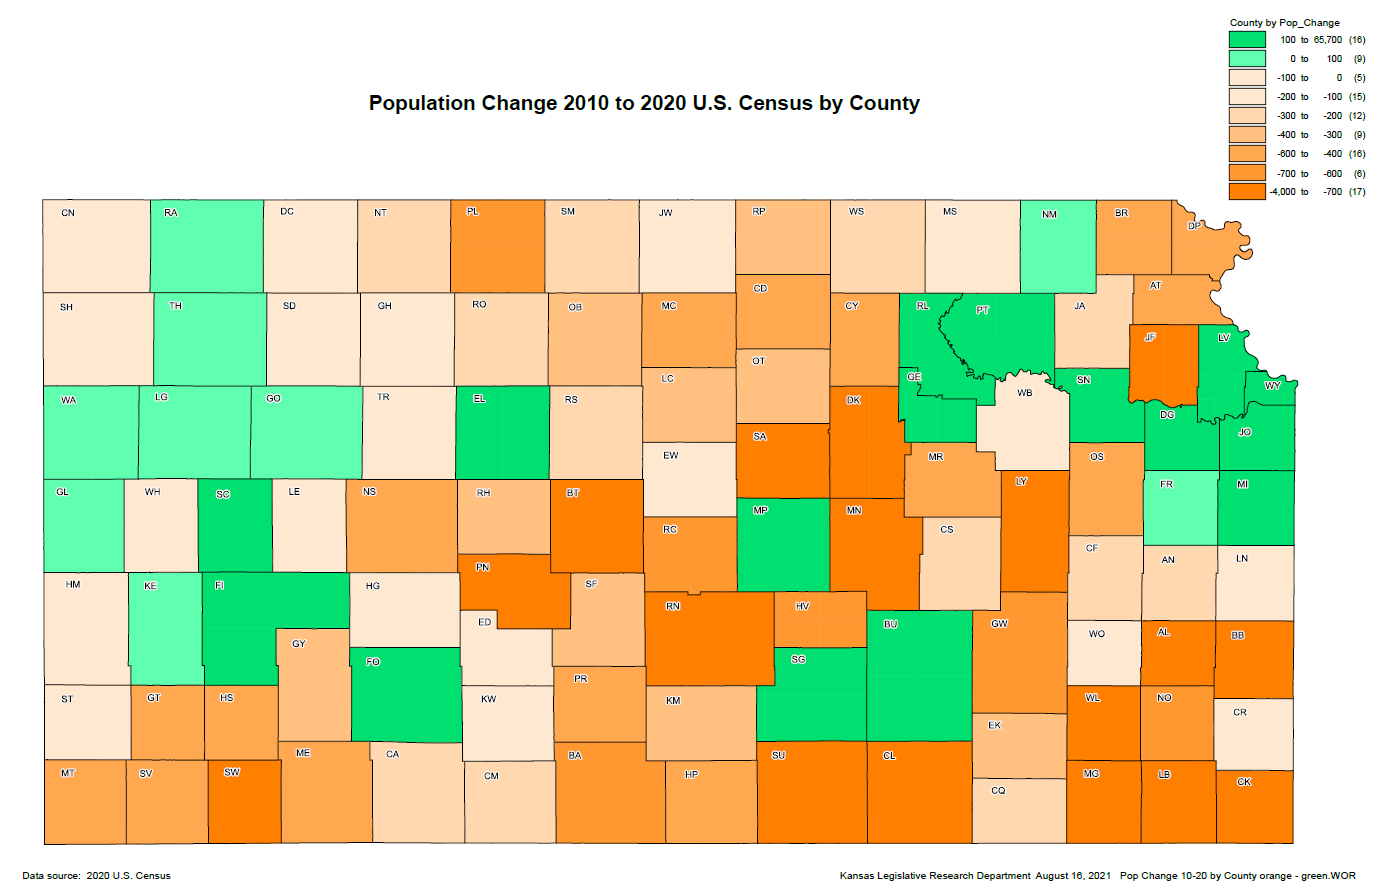 Source: http://www.kslegresearch.org/KLRD-web/Publications/Redistricting/Kansas-Population-Change-2010-2020-by-County.pdf Map showing counties in Kansas and population change 2010-2020